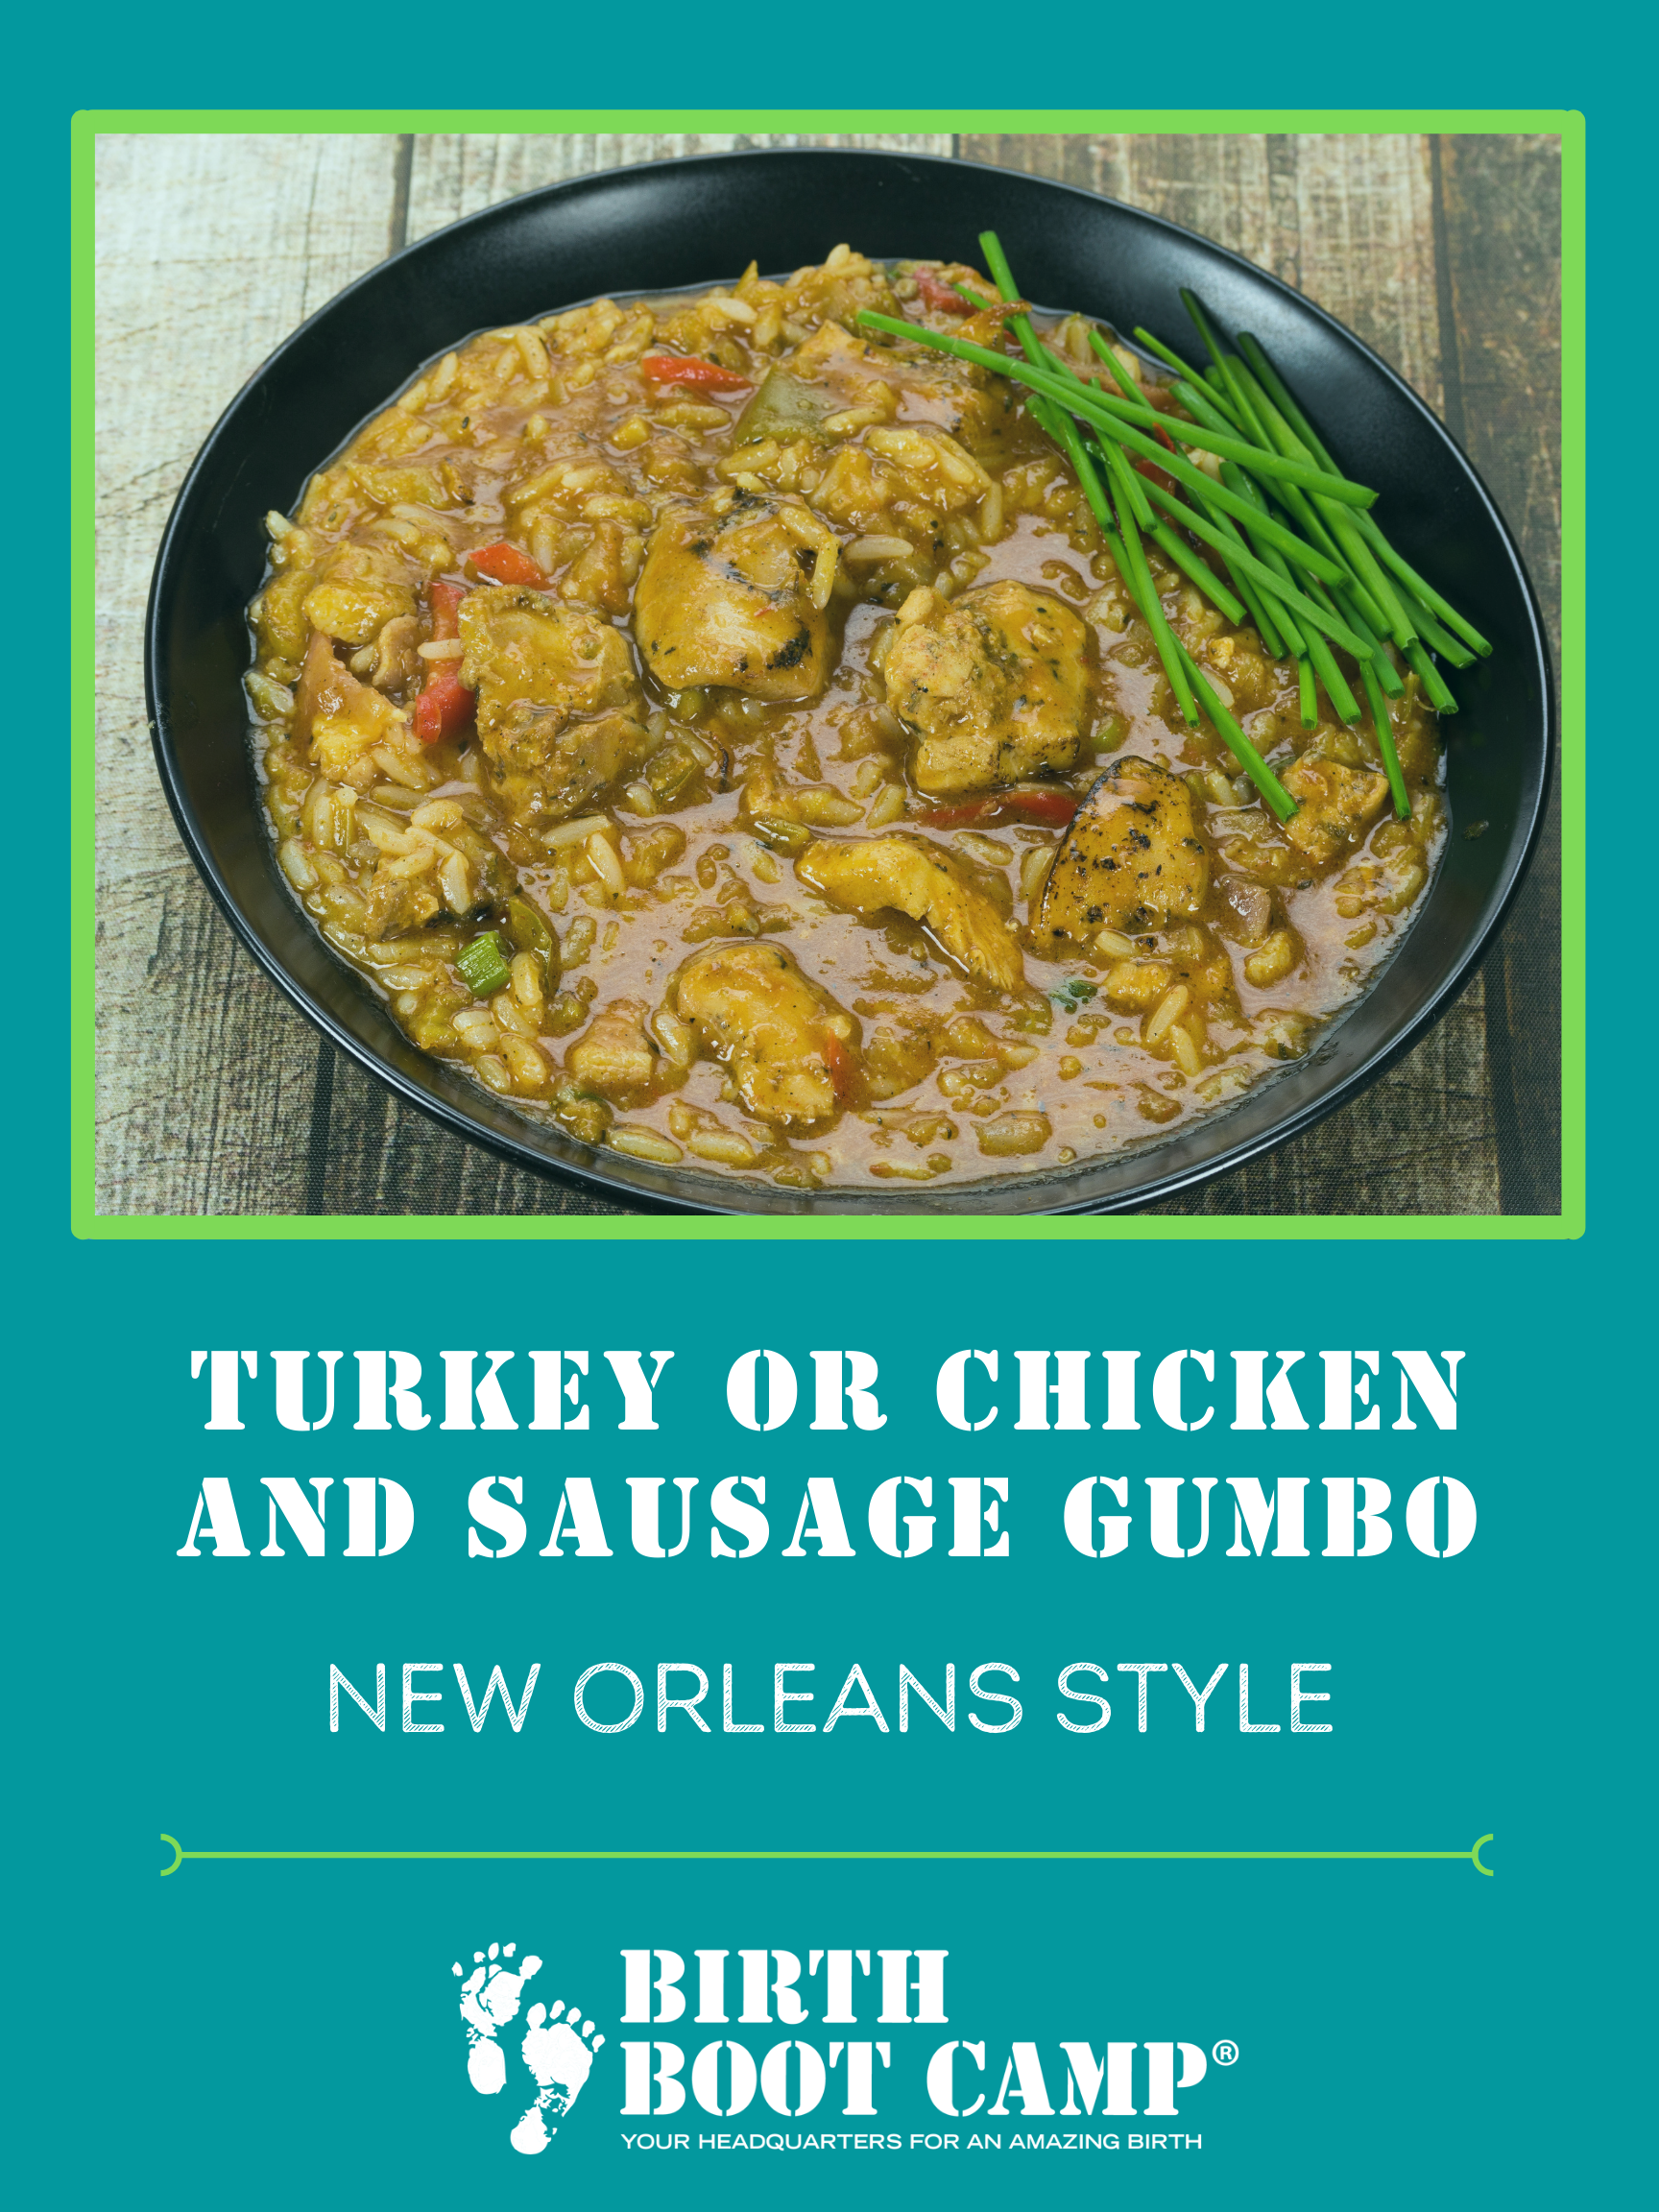 What to Eat Wednesday – Turkey or Chicken & Sausage Gumbo: New Orleans Style